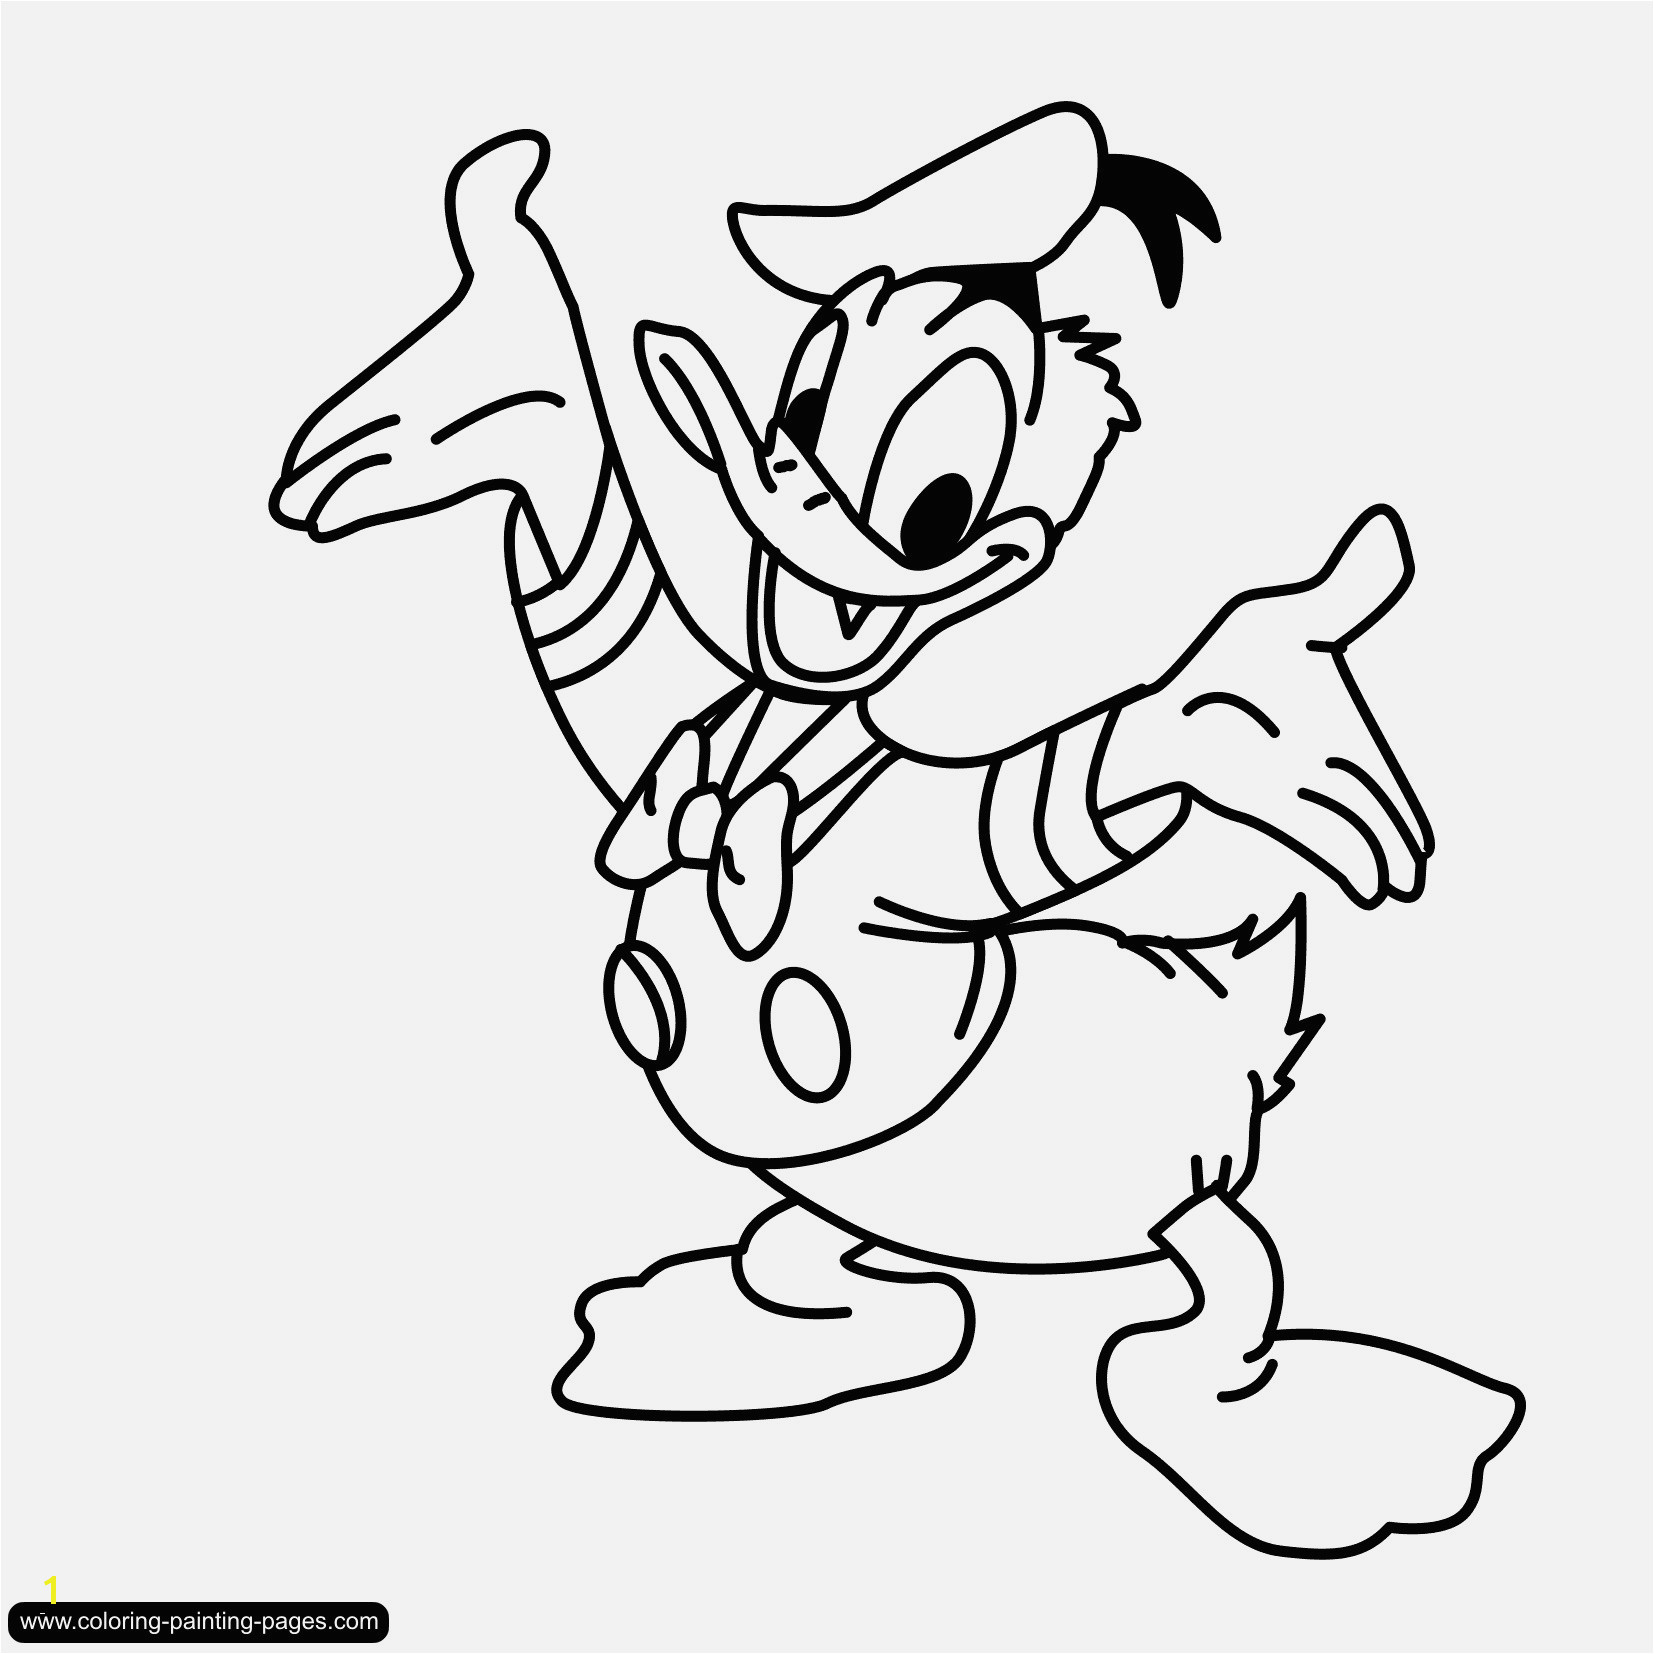 Duck Coloring Pages Free Download Coloring Pages Ducks Lovely Coloring Pages to Color Line Luxury